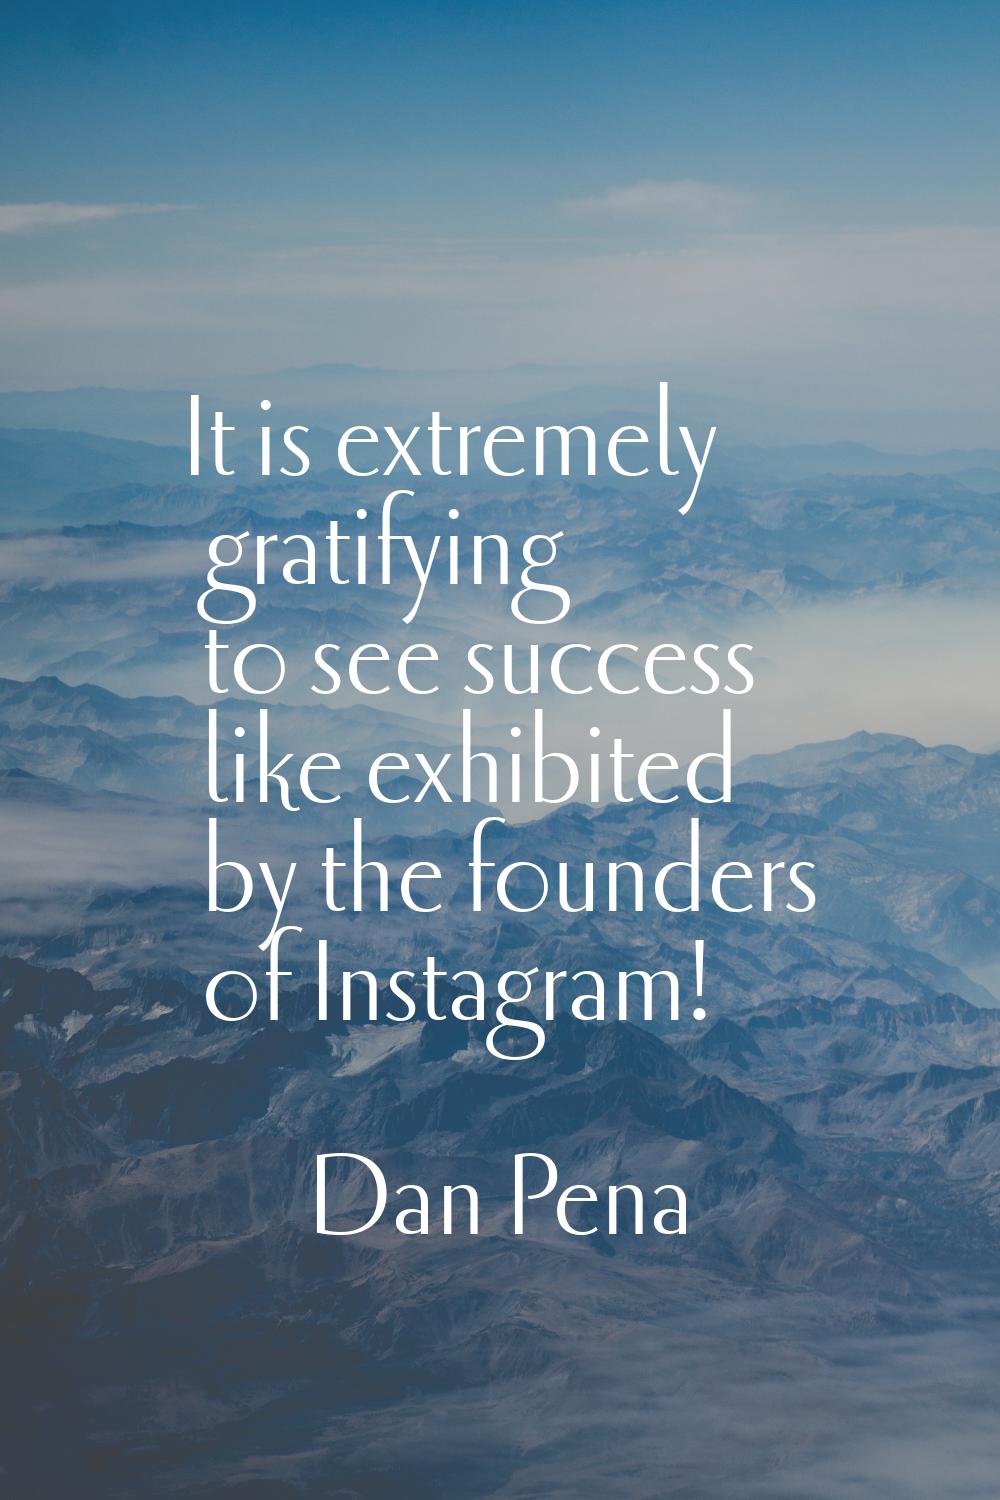 It is extremely gratifying to see success like exhibited by the founders of Instagram!